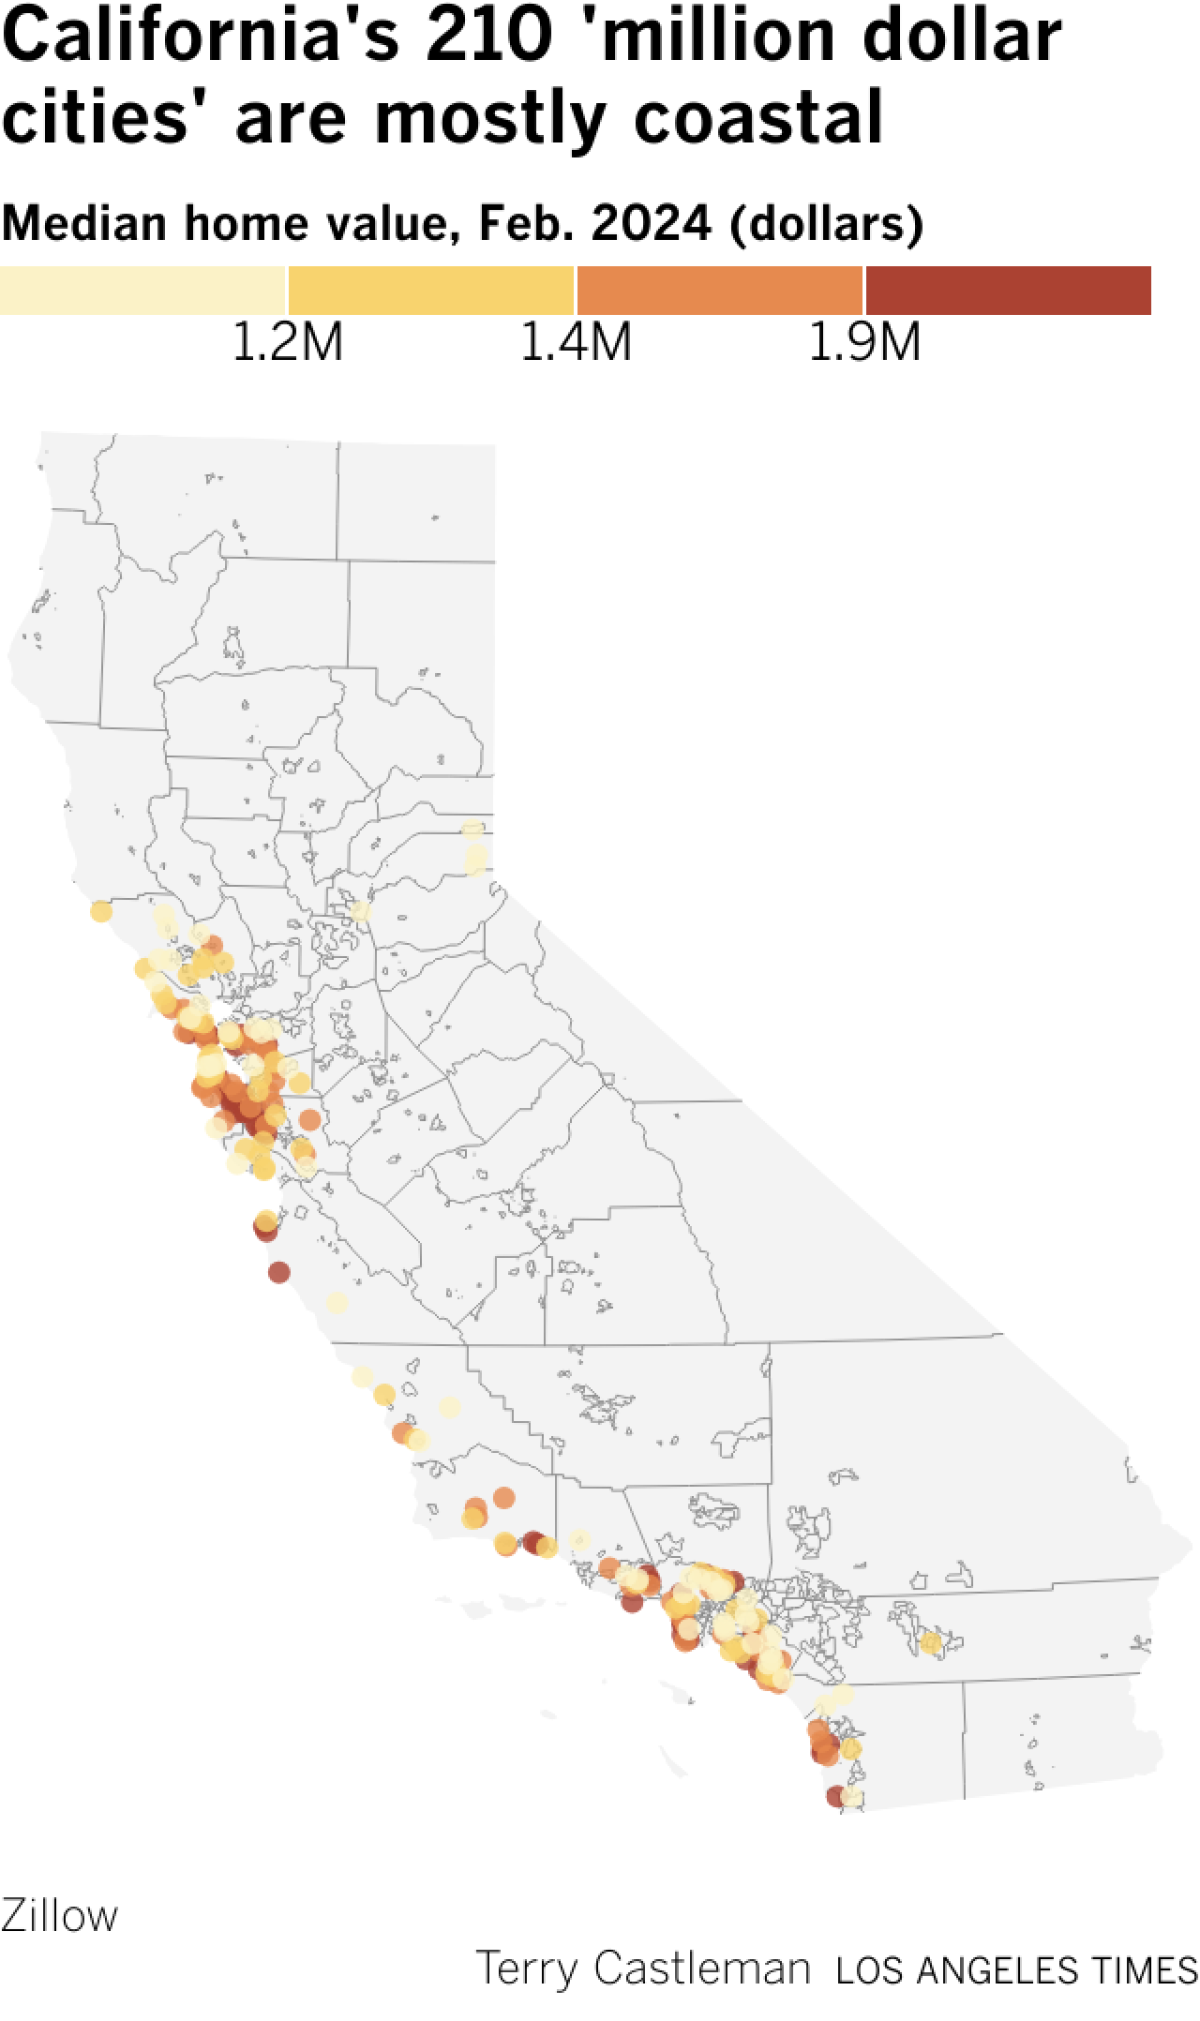 Map showing the 210 California cities where median home values exceed $1 million.